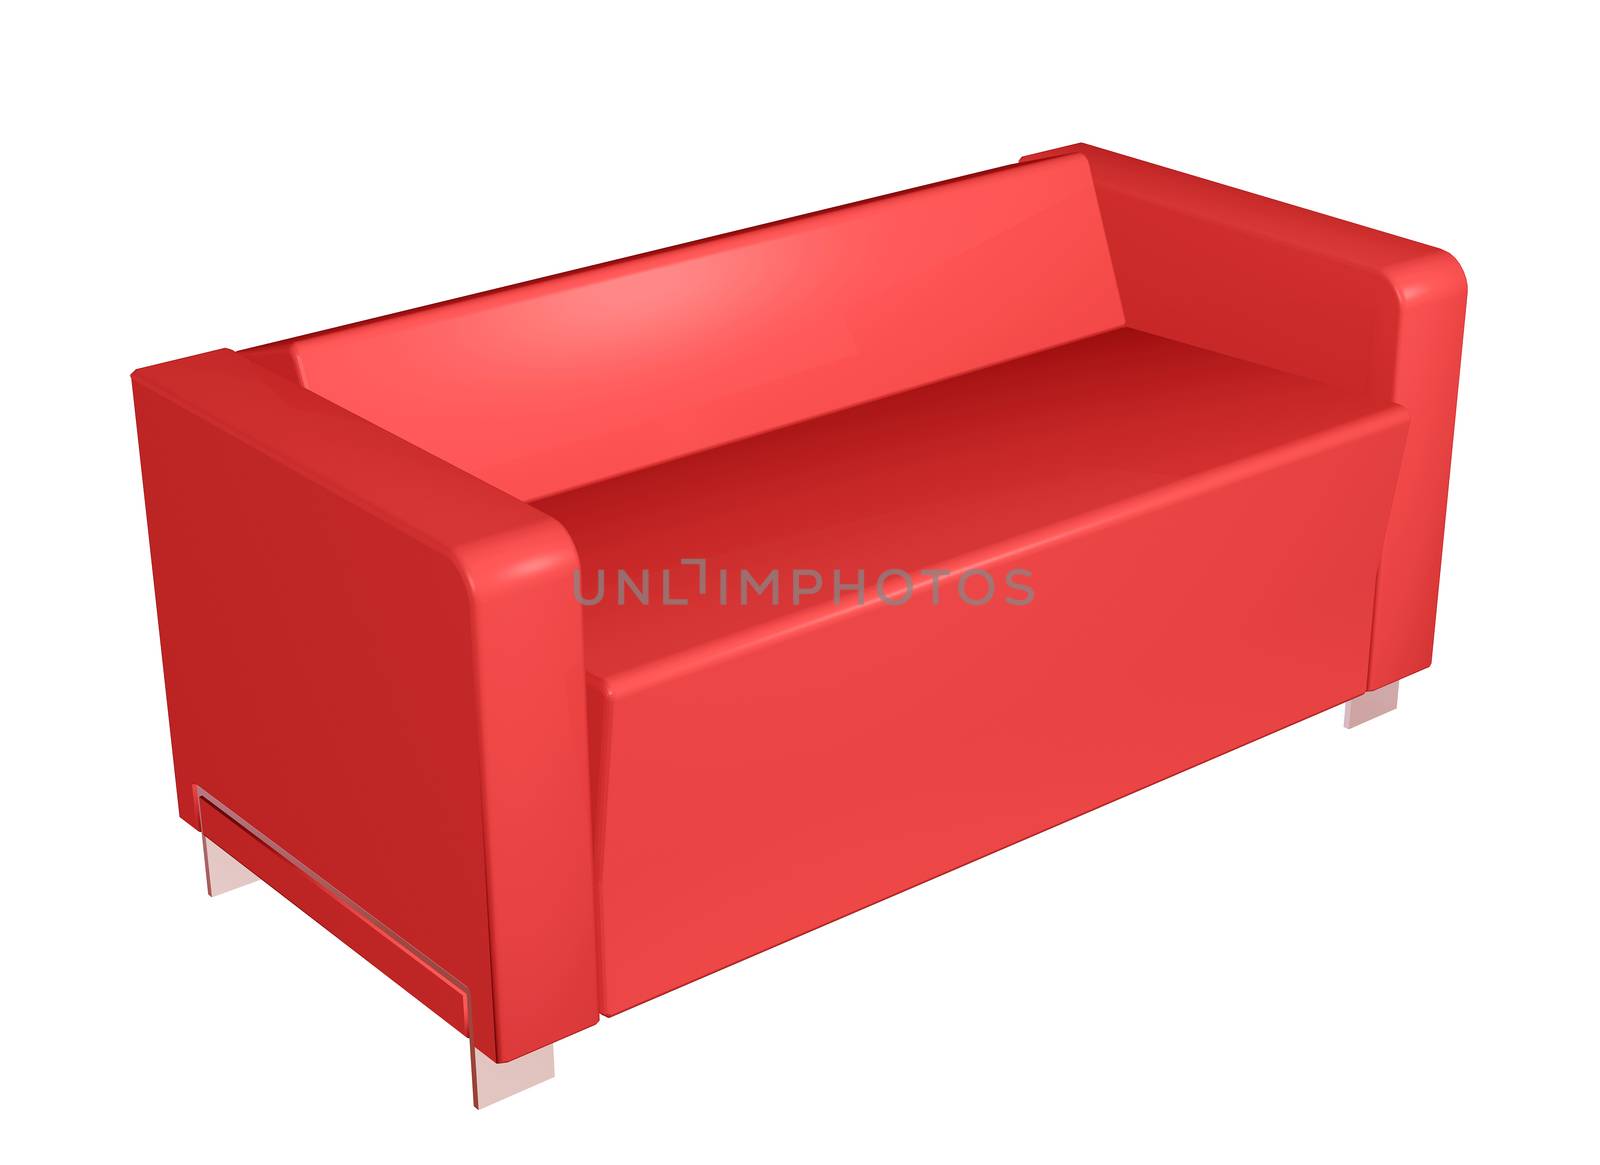 All leather sofa, red, 3D illustration